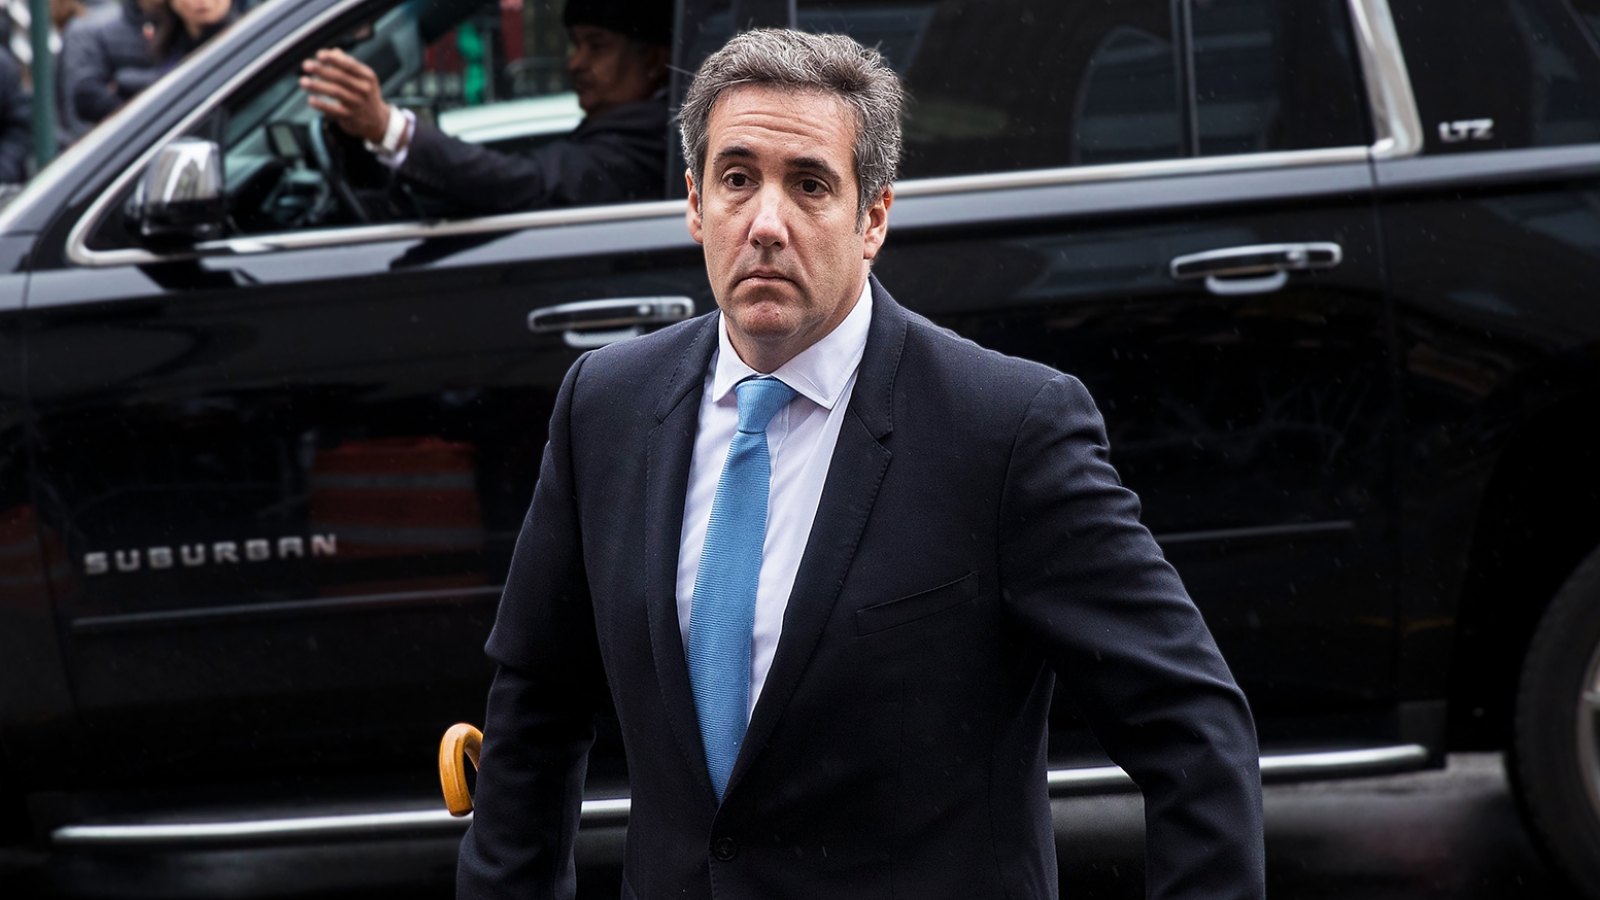 Donald Trump’s Former Lawyer Michael Cohen Indicted